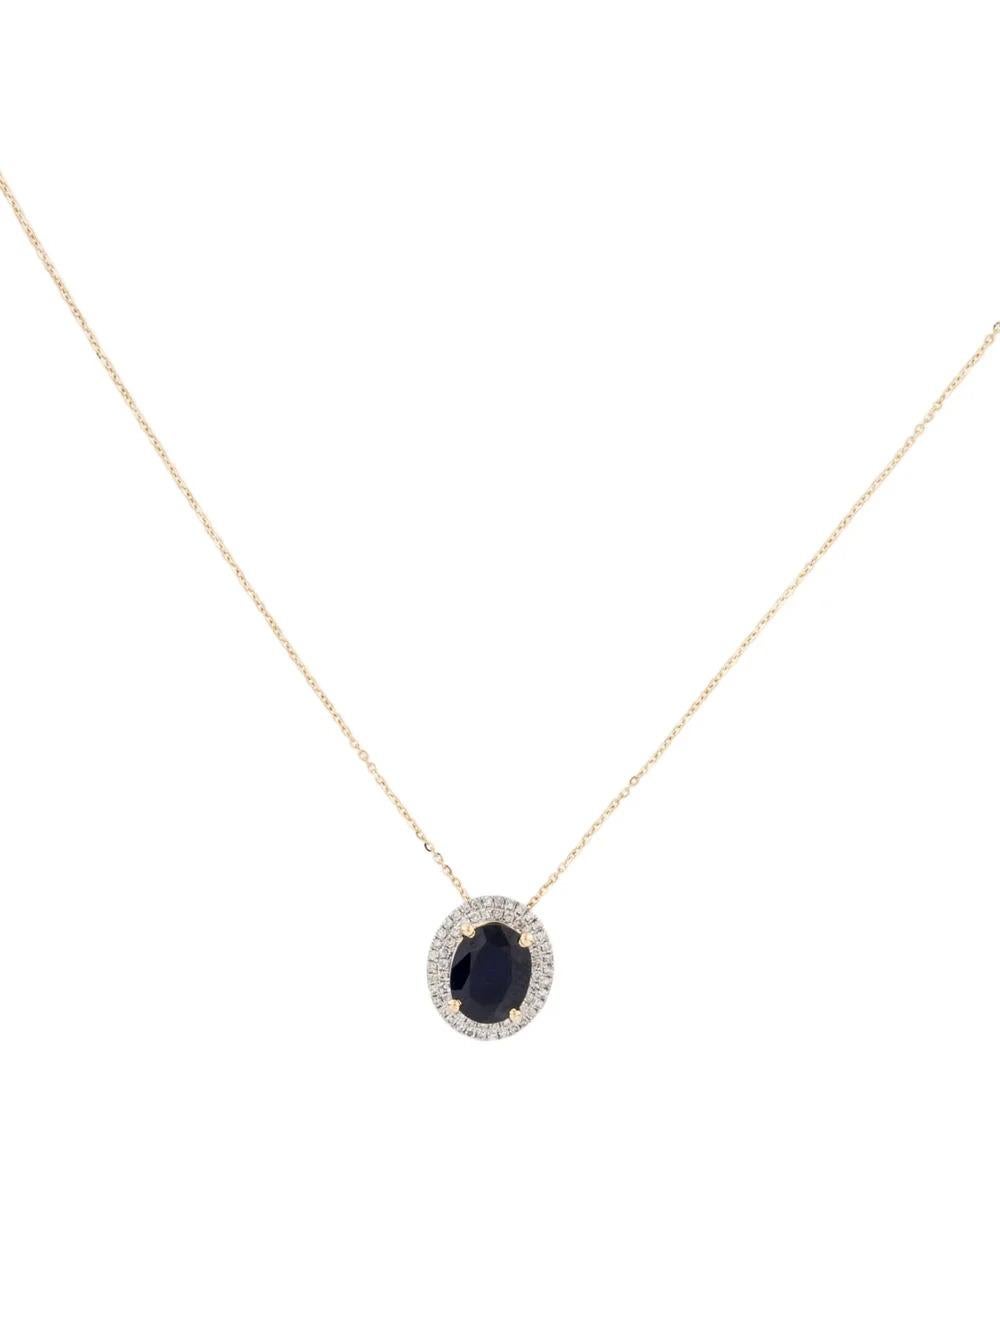 This stunning pendant necklace exudes elegance and sophistication, crafted with meticulous attention to detail from luxurious rhodium-plated 14K yellow gold. Adorned with a captivating oval modified brilliant sapphire, boasting a remarkable carat